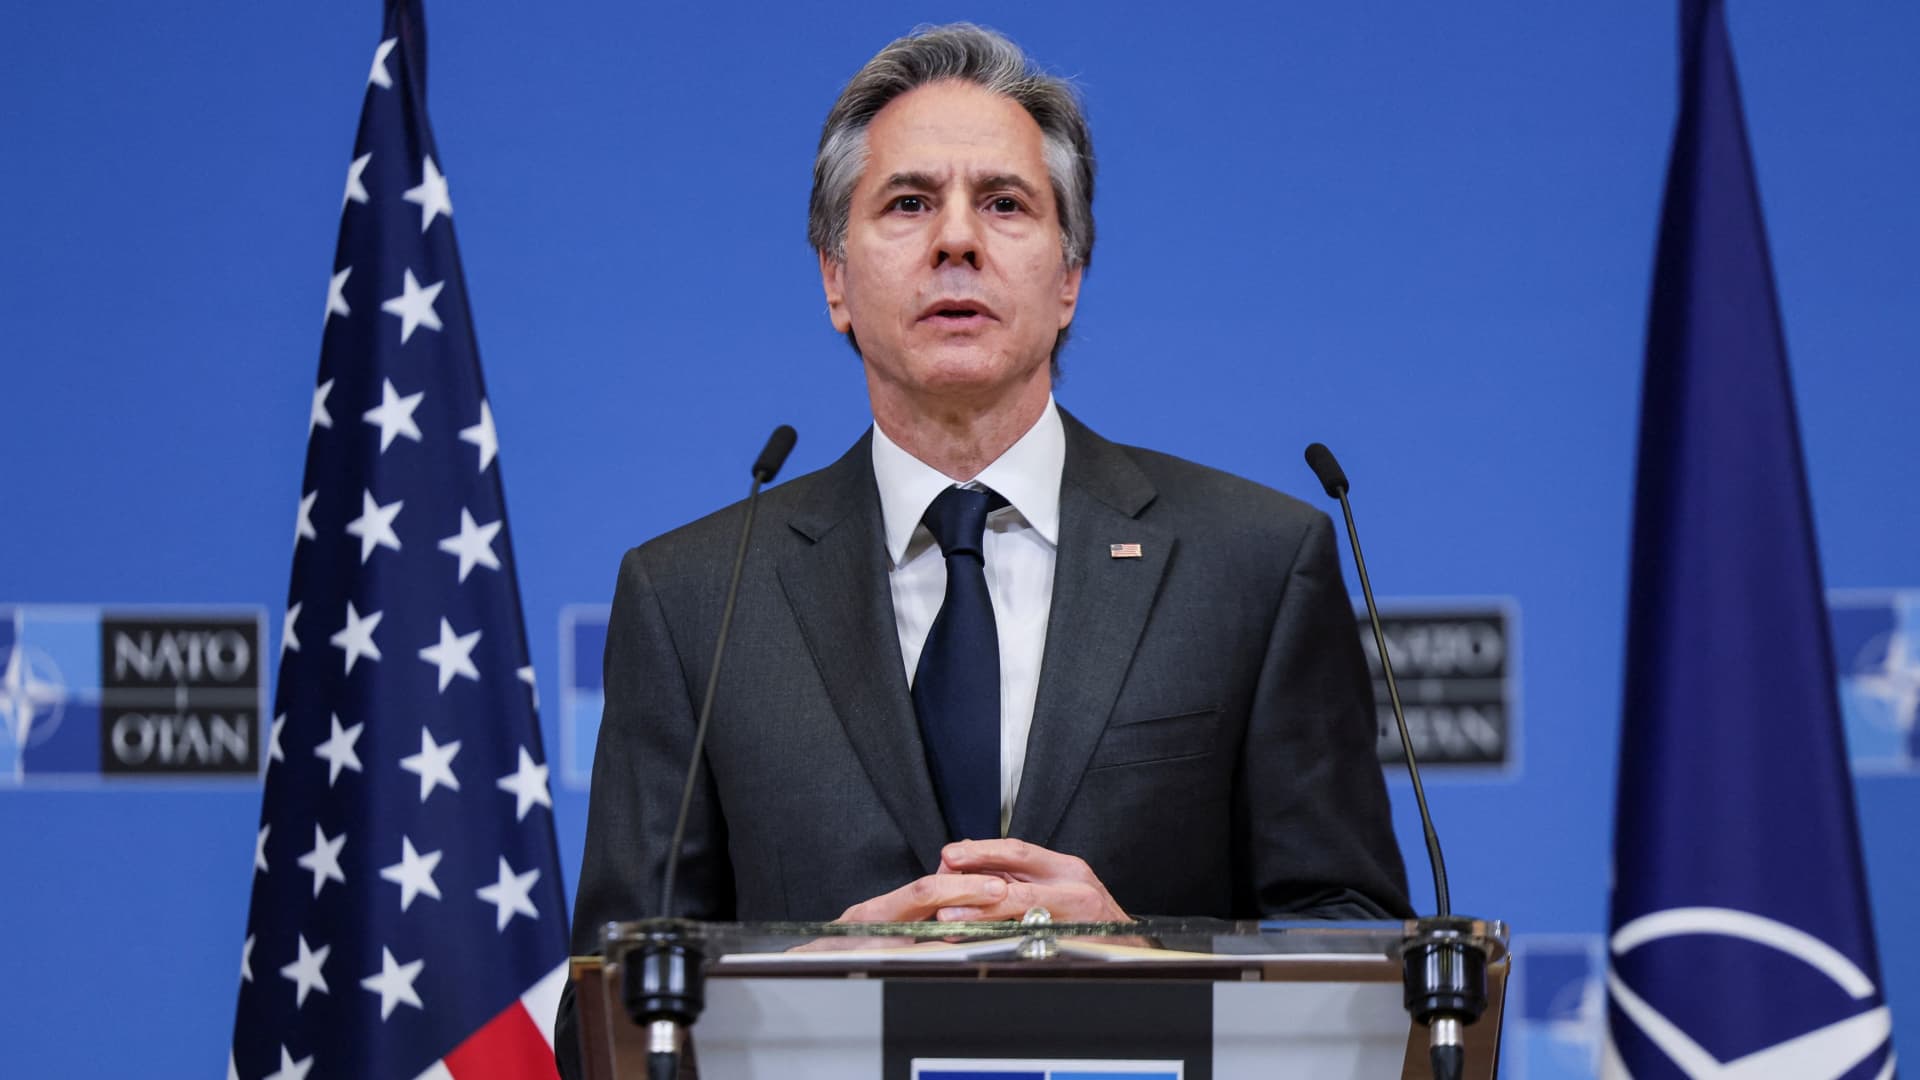 U.S. Secretary of State Antony Blinken speaks to the media after a NATO foreign ministers meeting, amid Russia's invasion of Ukraine, at NATO headquarters in Brussels, Belgium April 7, 2022.